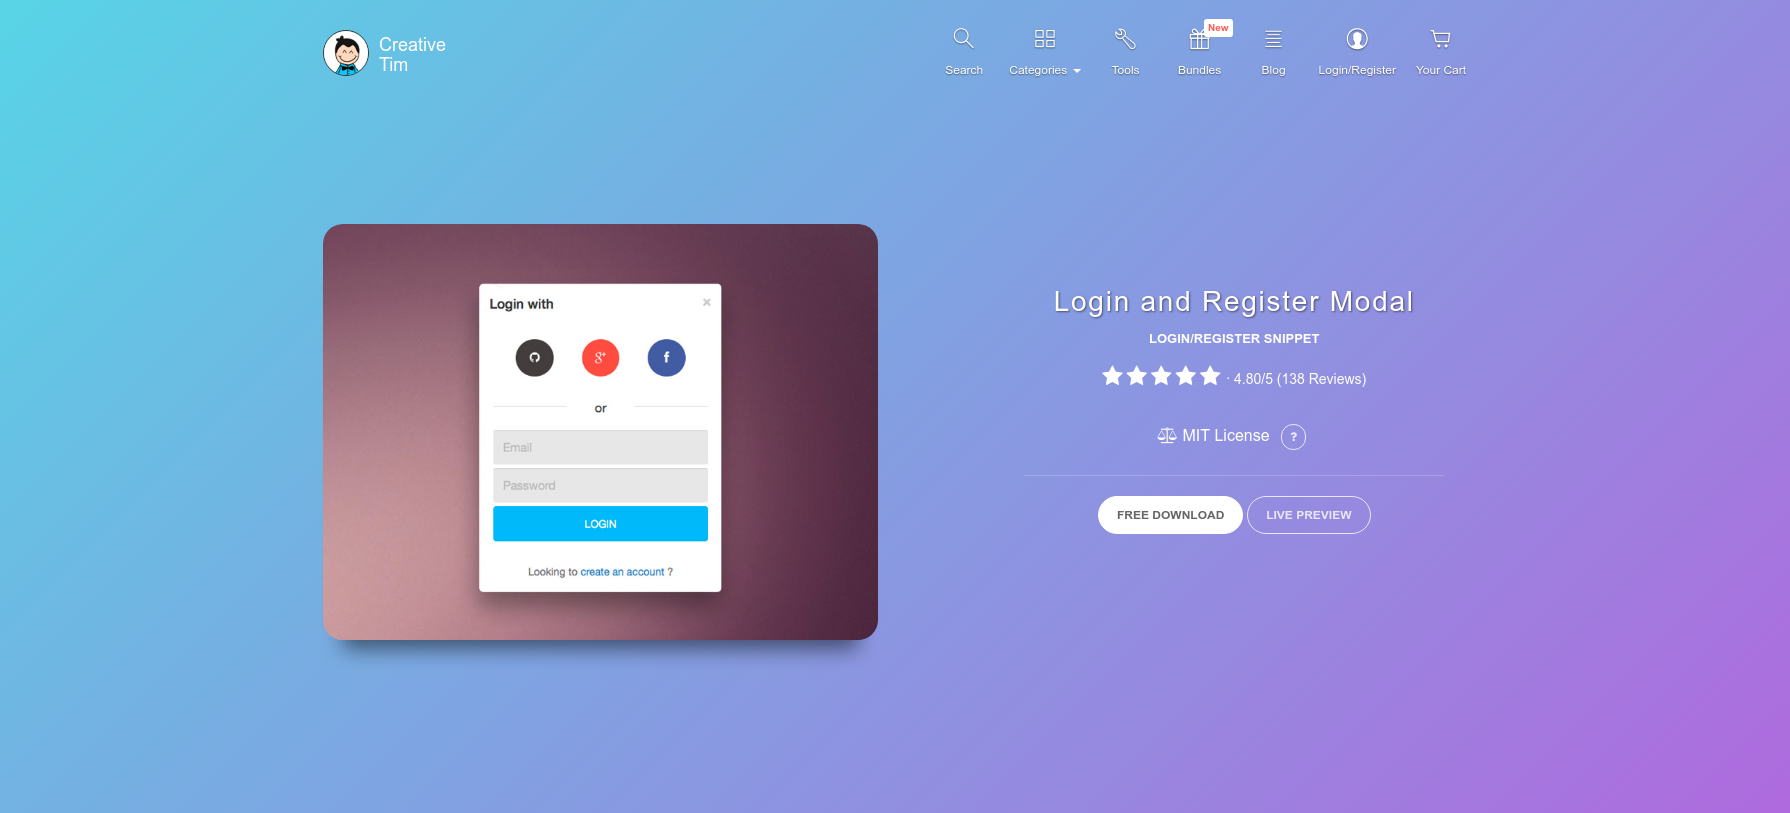 Login and register modal from creative tim